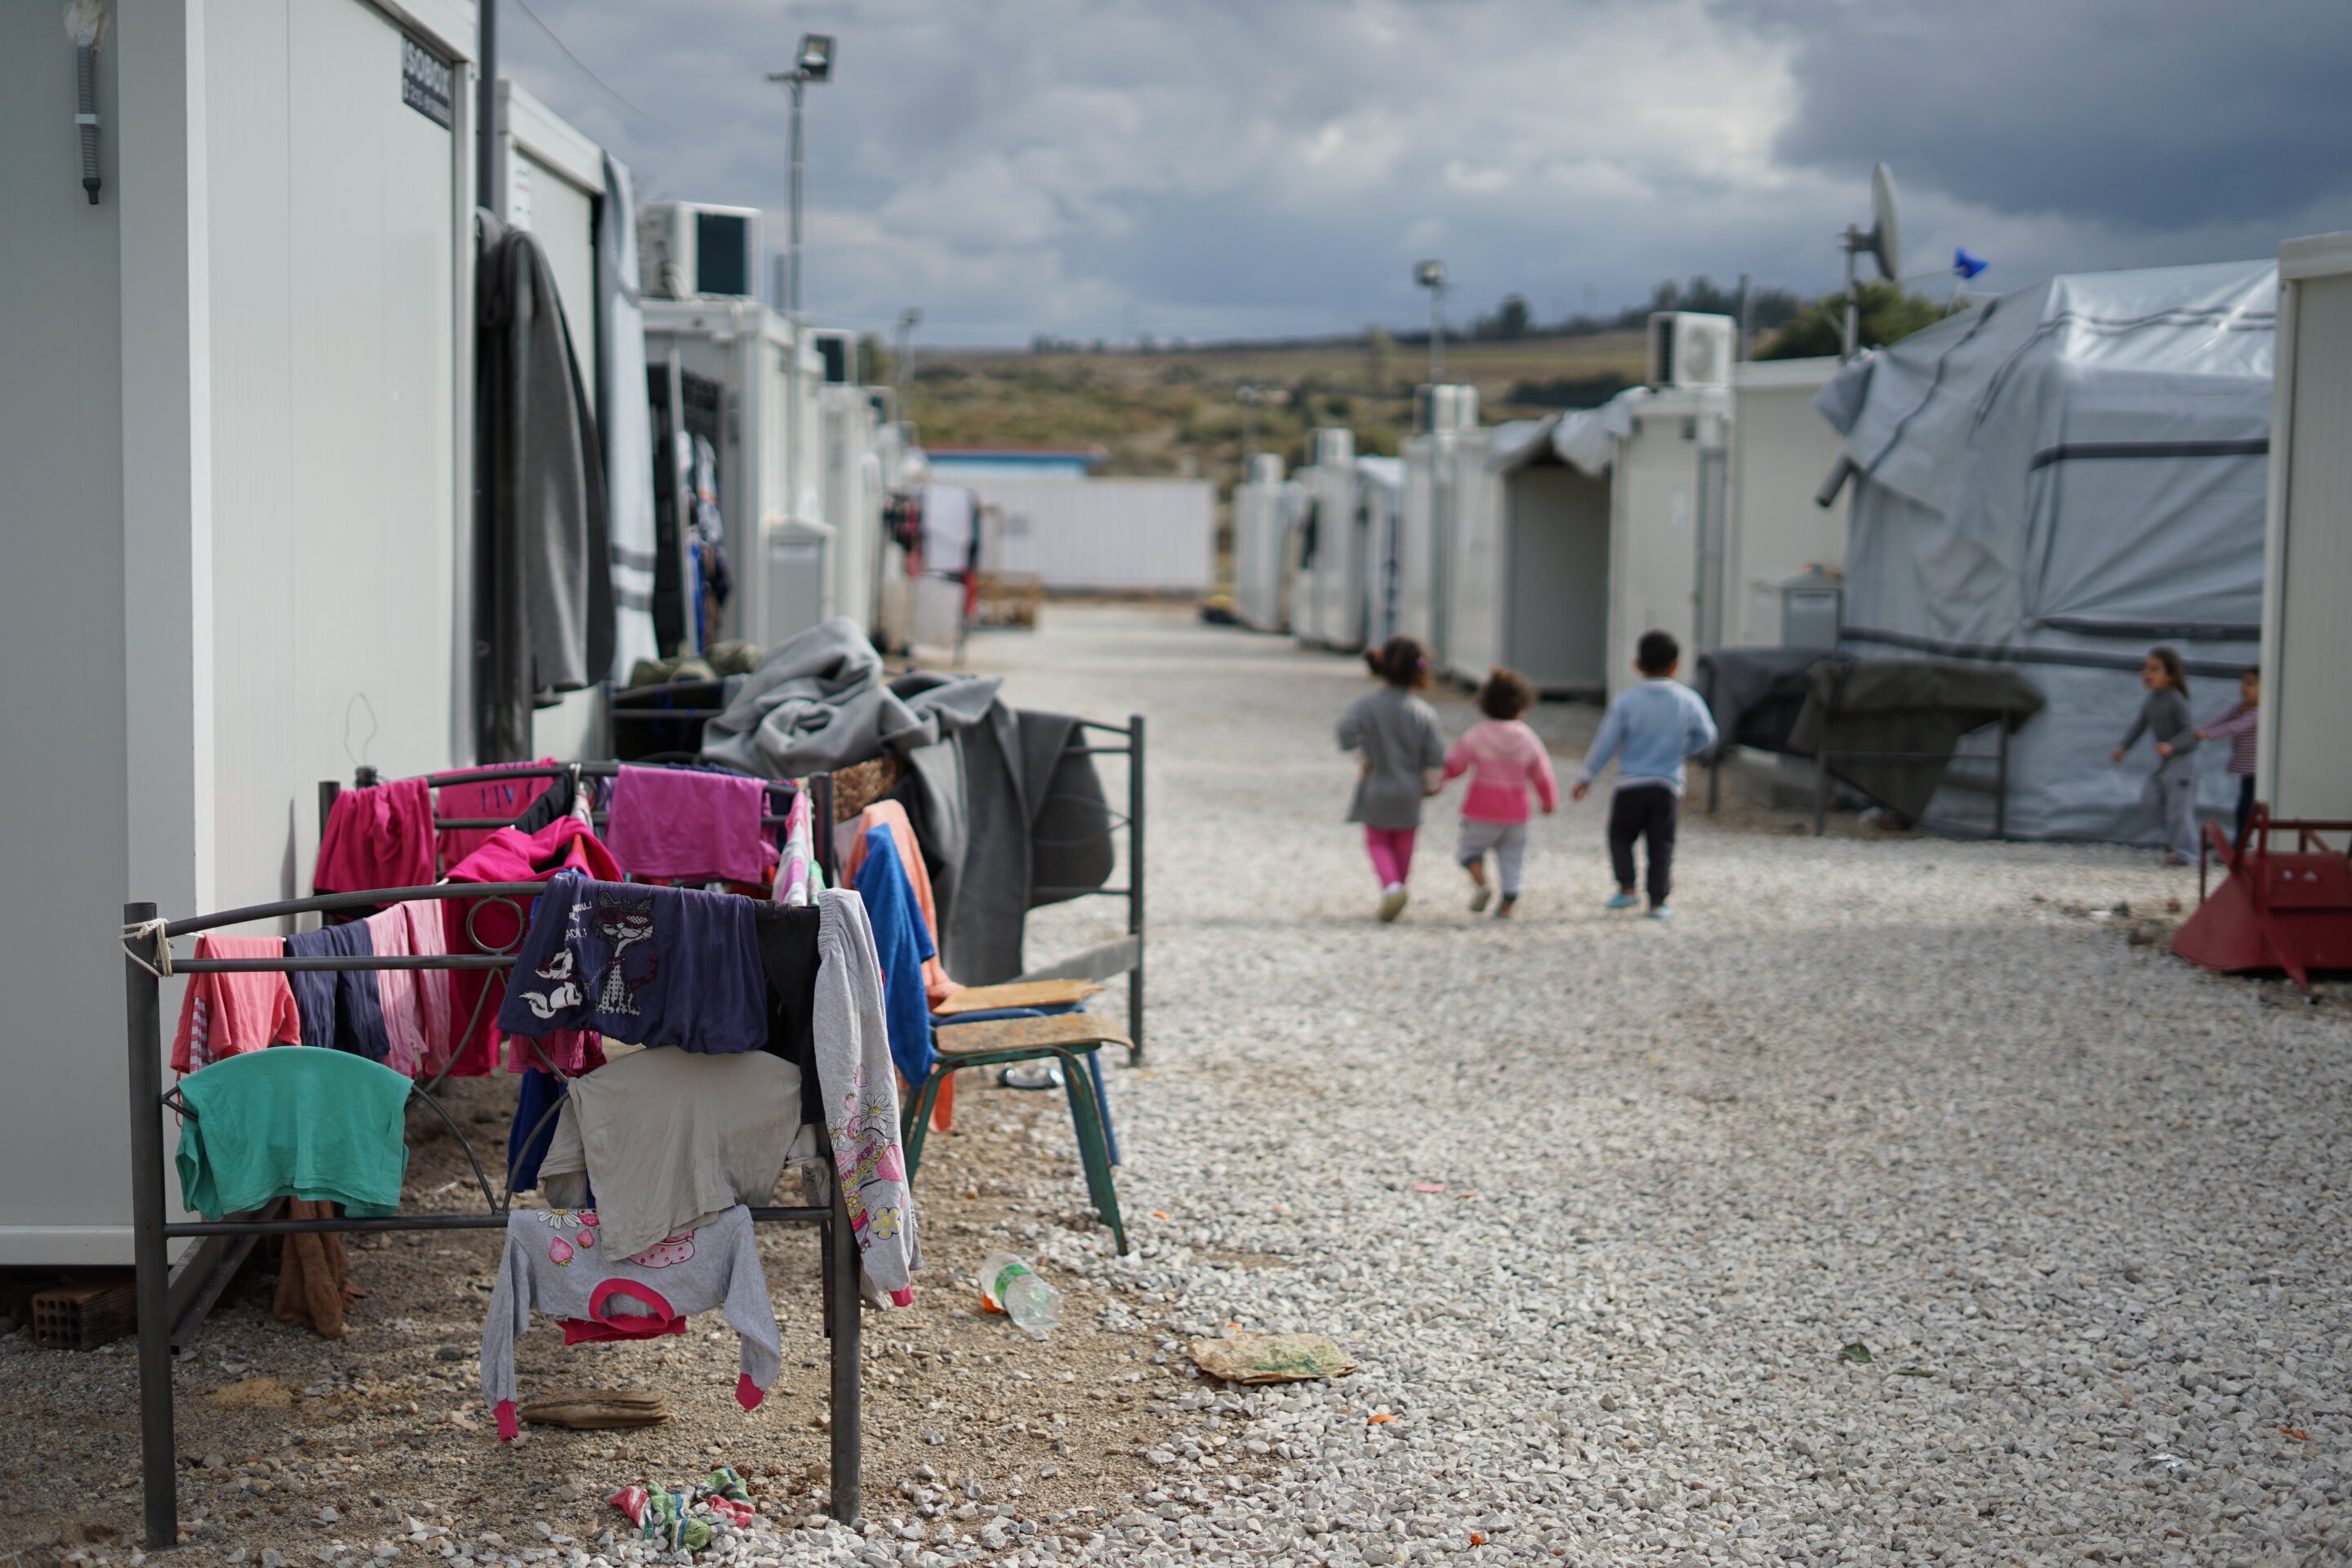 #Partnership between humanitarian organizations and government is essential for providing cash assistance to refugees